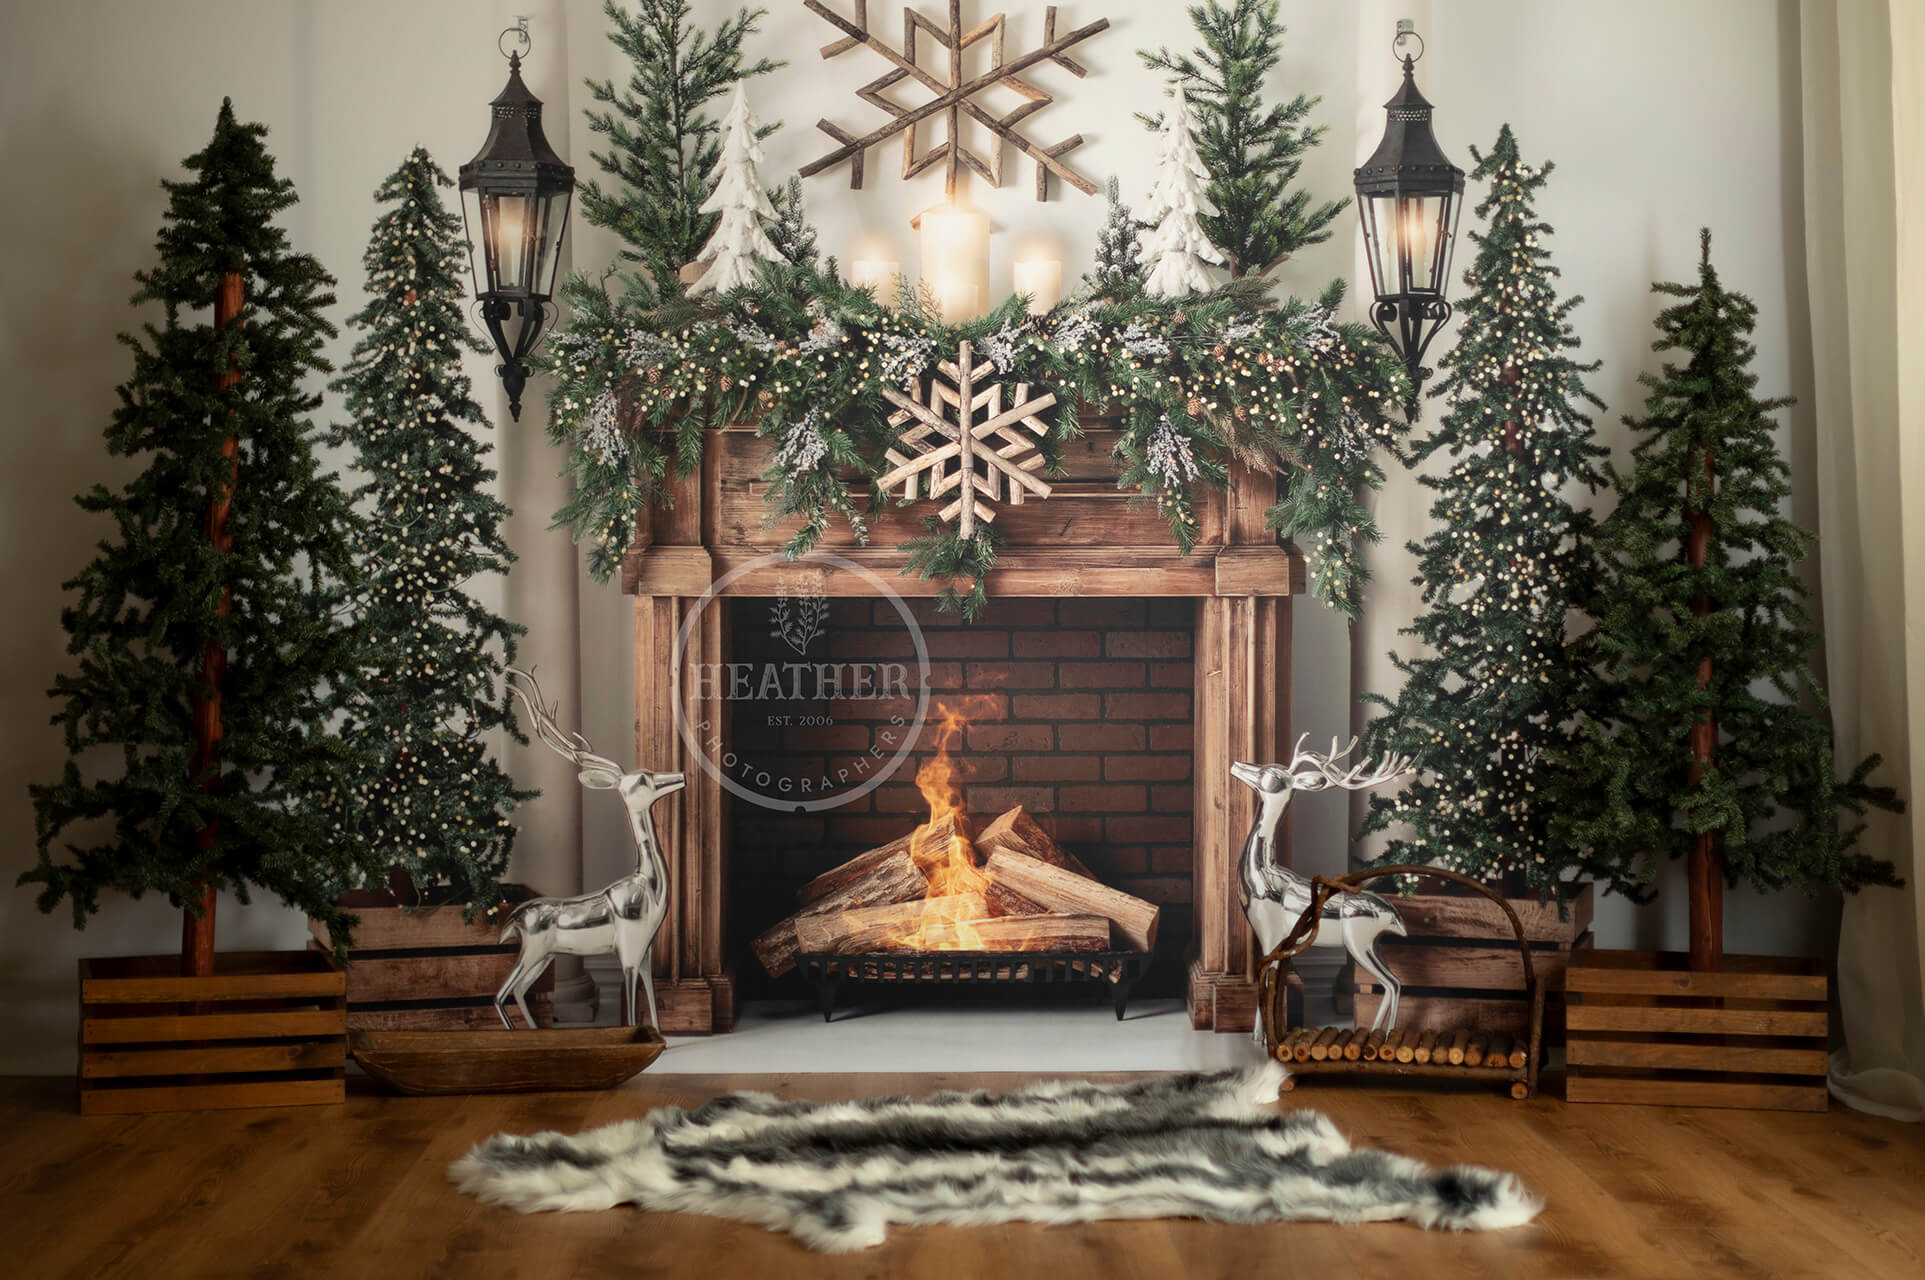 inviting scene with a glowing fireplace backdrop